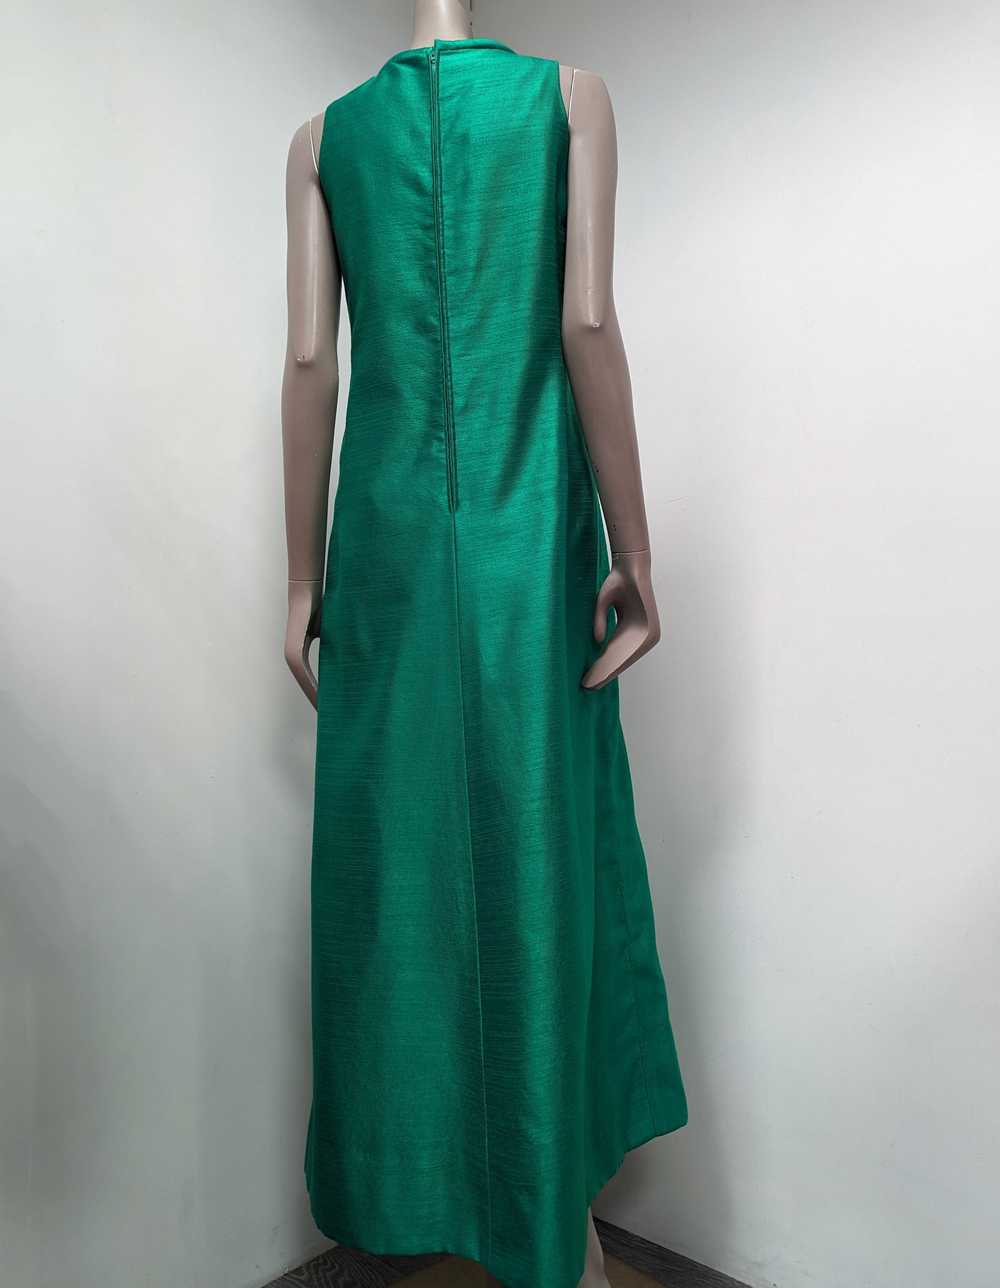 Incredible 1960s bright green evening maxi dress … - image 3